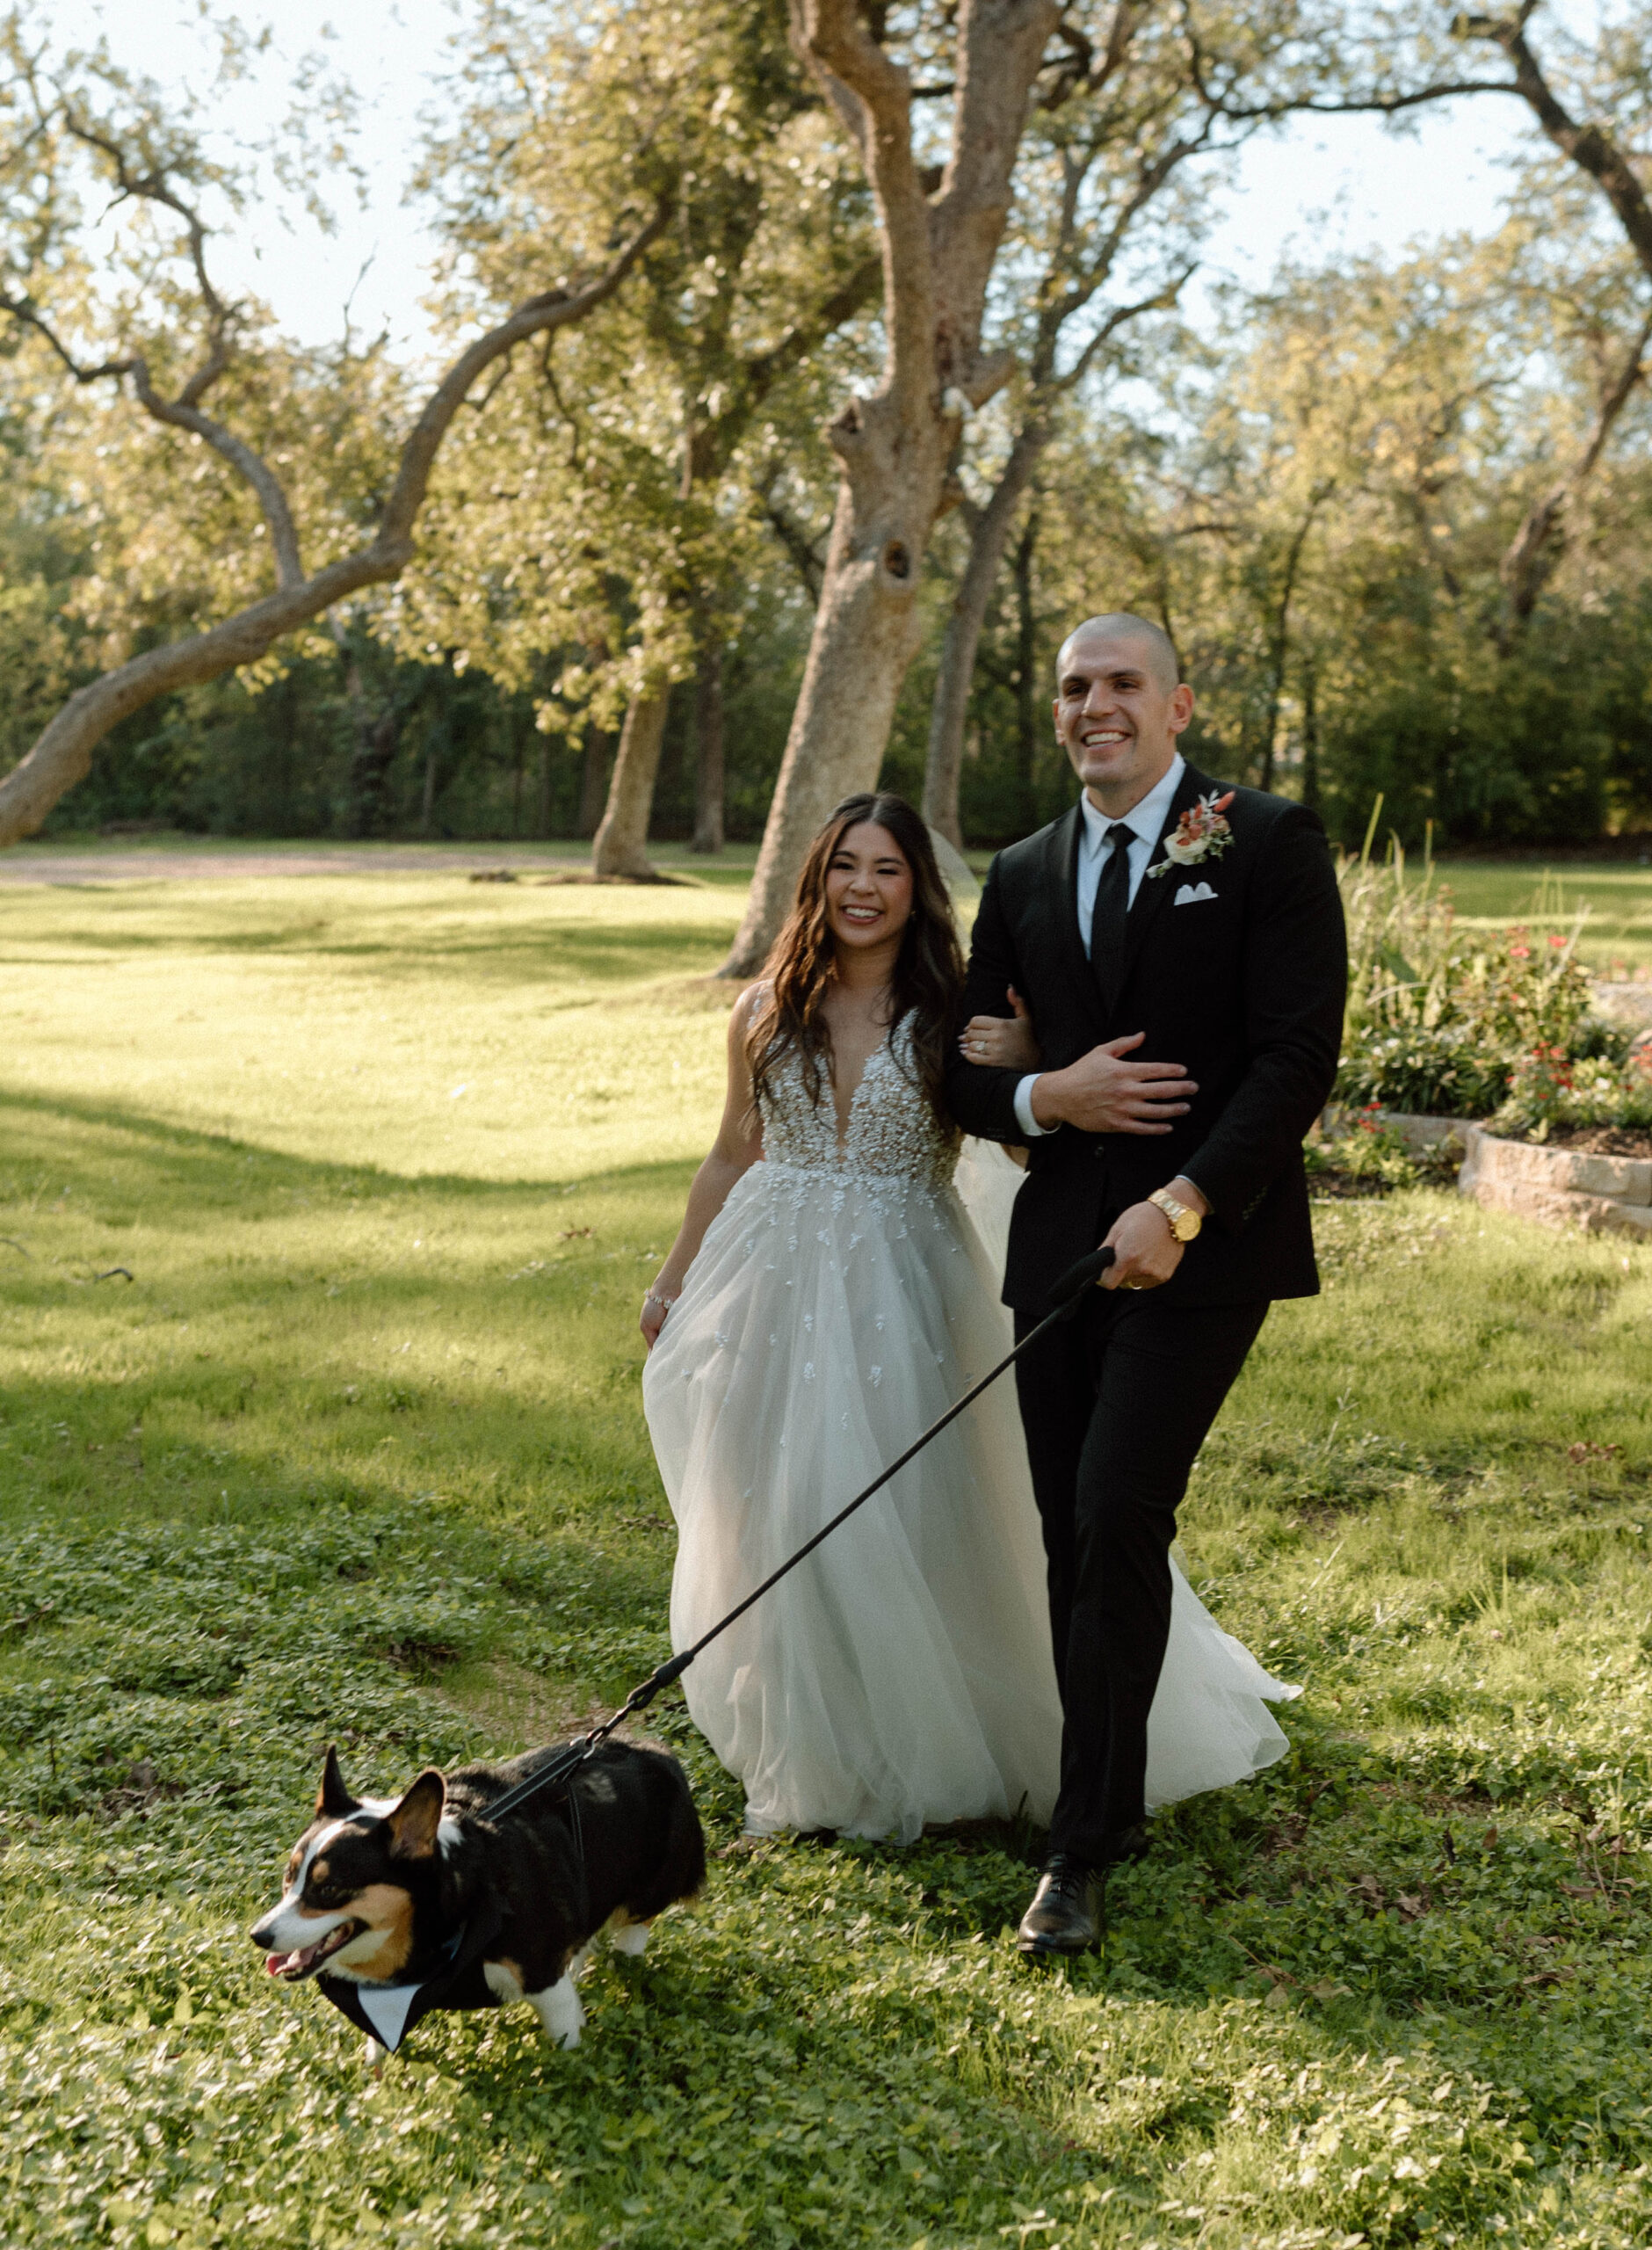 Married couple getting photos with their dog at their wedding. 